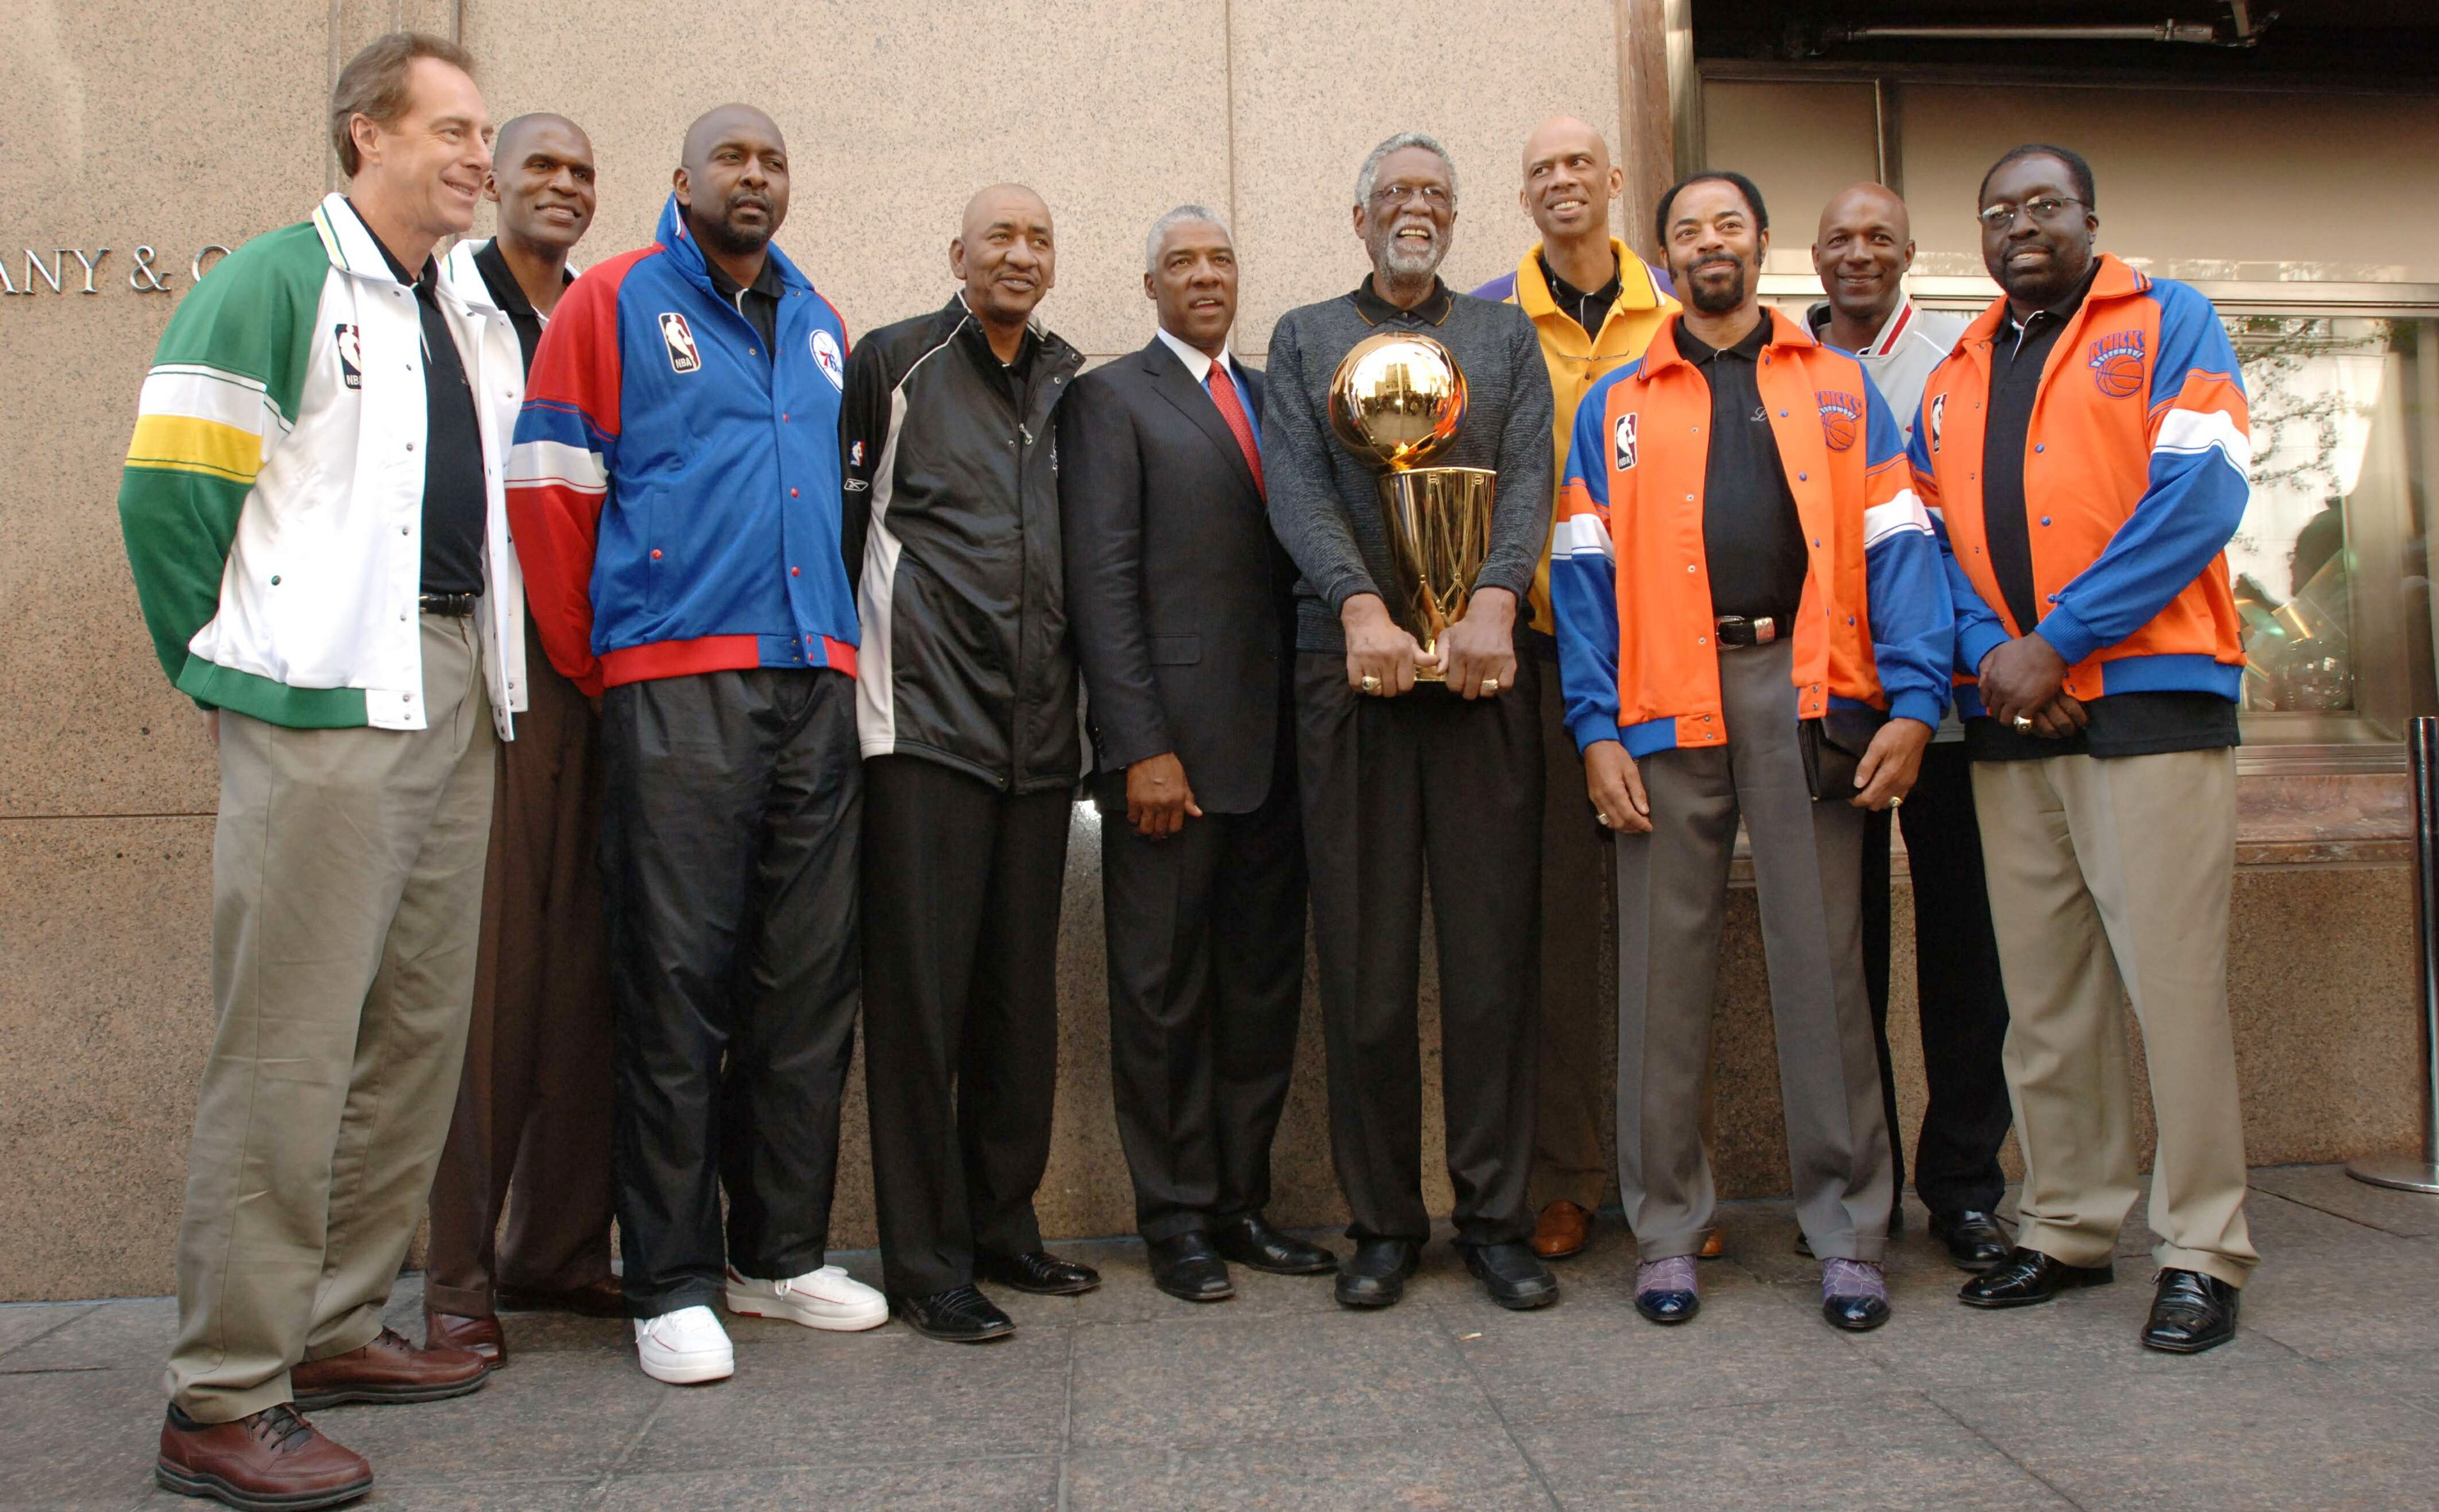 moses malone height